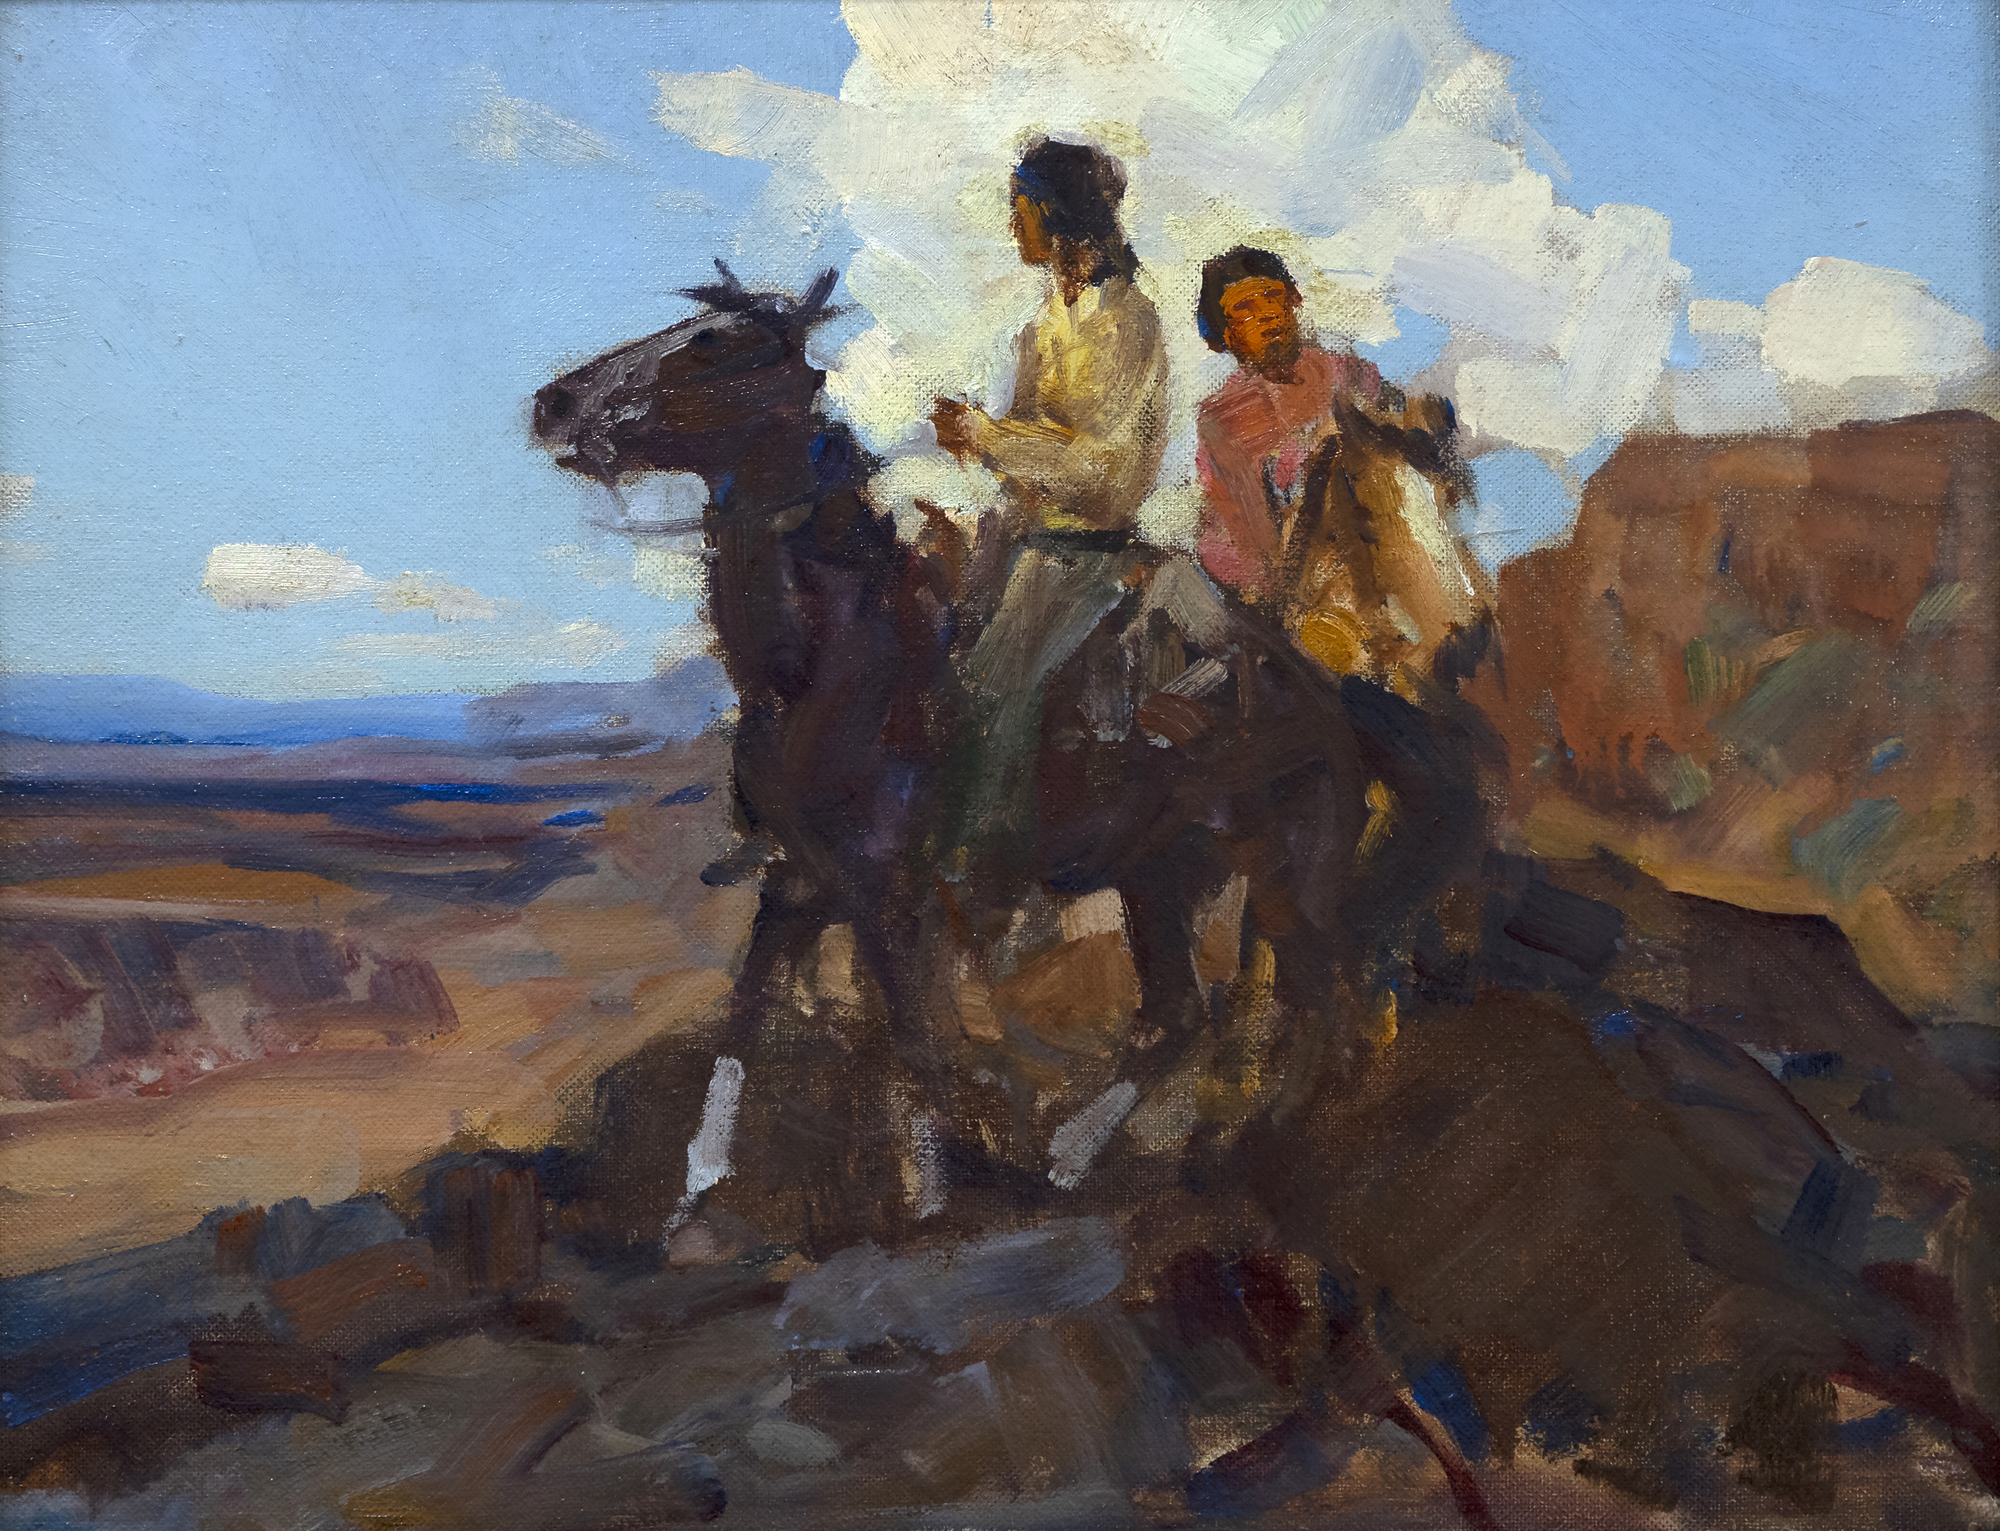 FRANK TENNEY JOHNSON - Scouting - oil on canvas - 13 1/2 x 17 in.